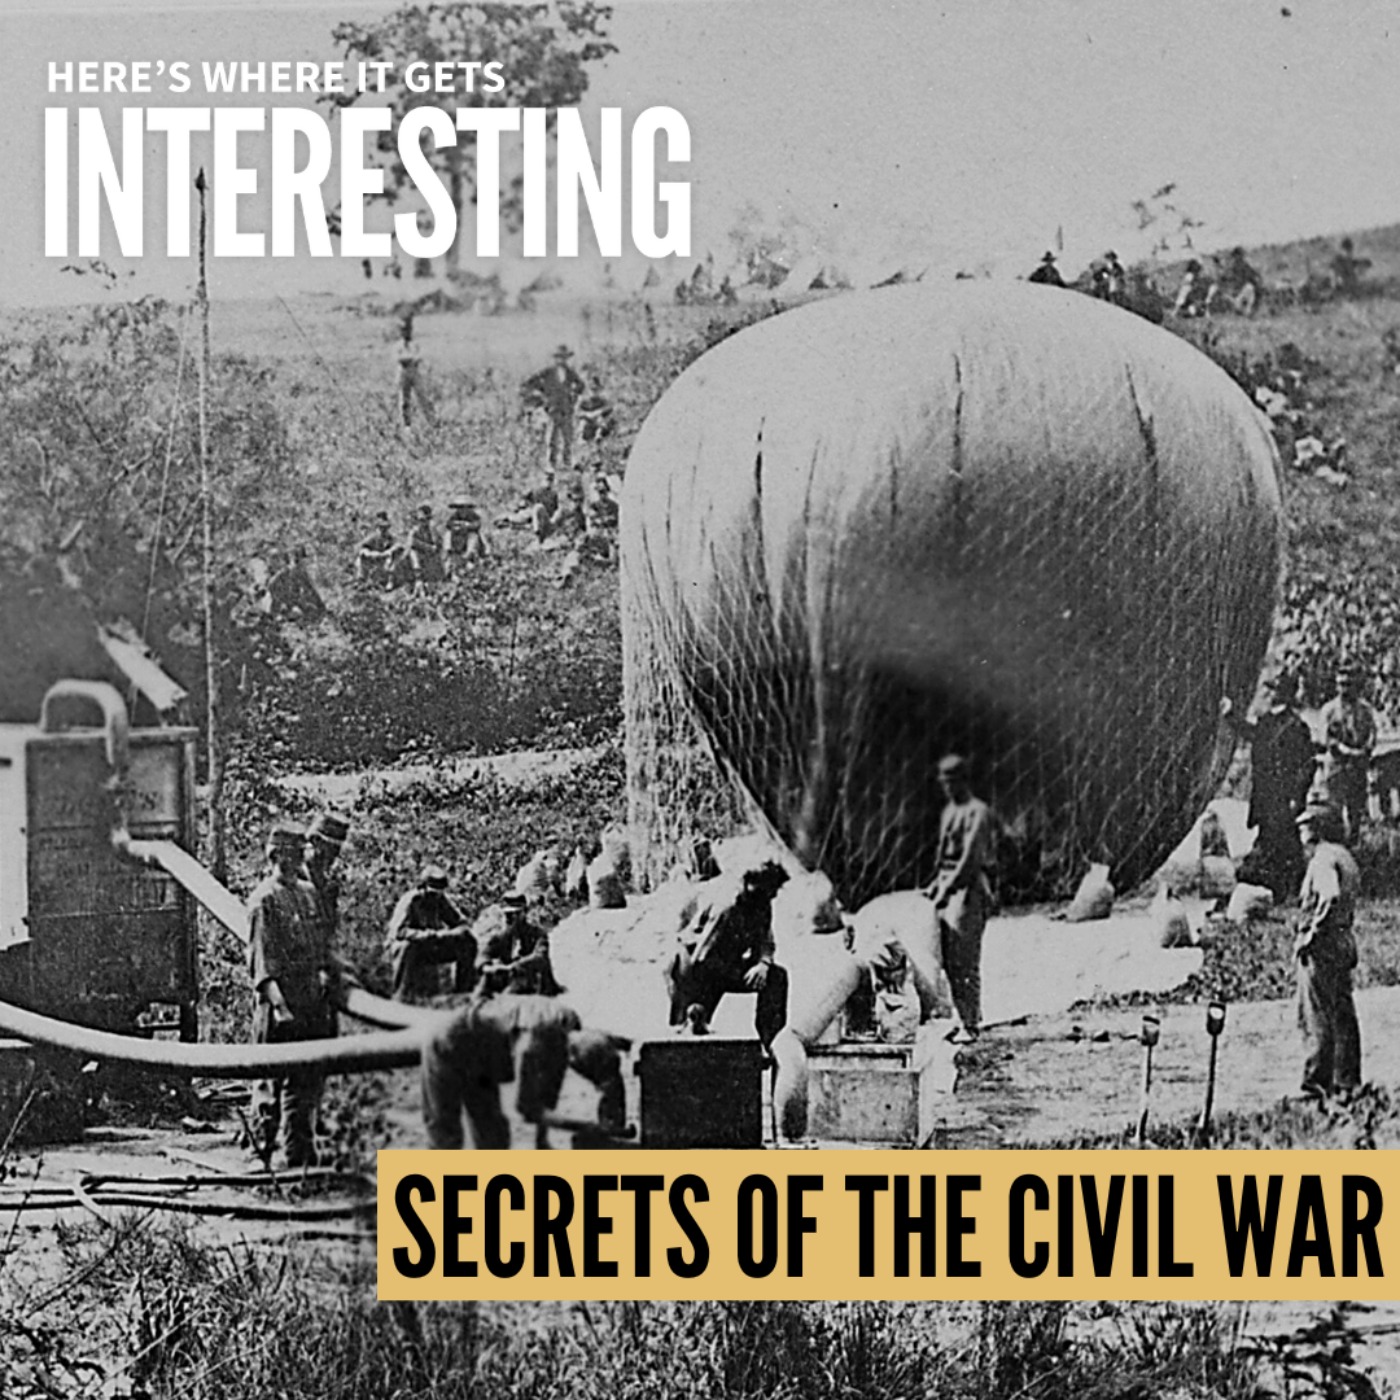 Secrets of the Civil War: The Necessity of Innovation